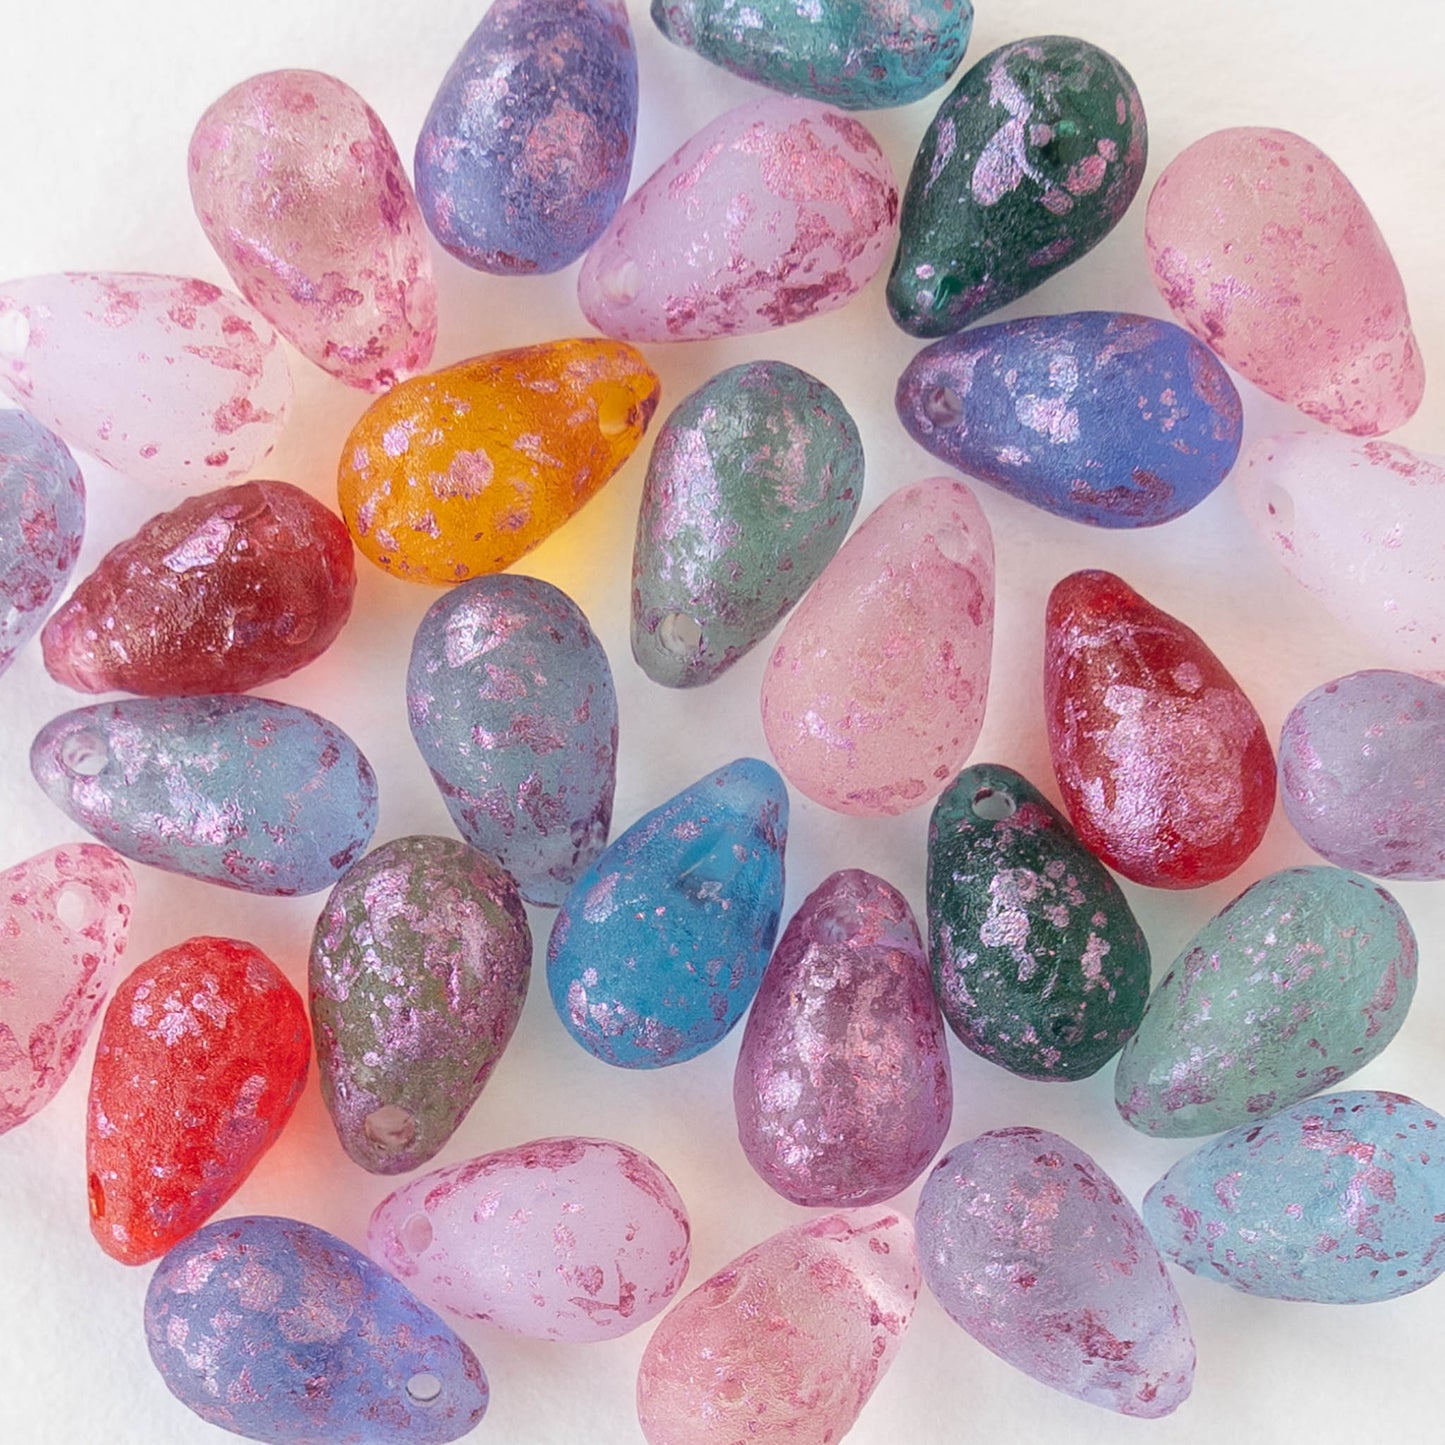 6x9mm Glass Teardrop Beads - Mixed Matte Colors with Pink Dust - 30 Beads